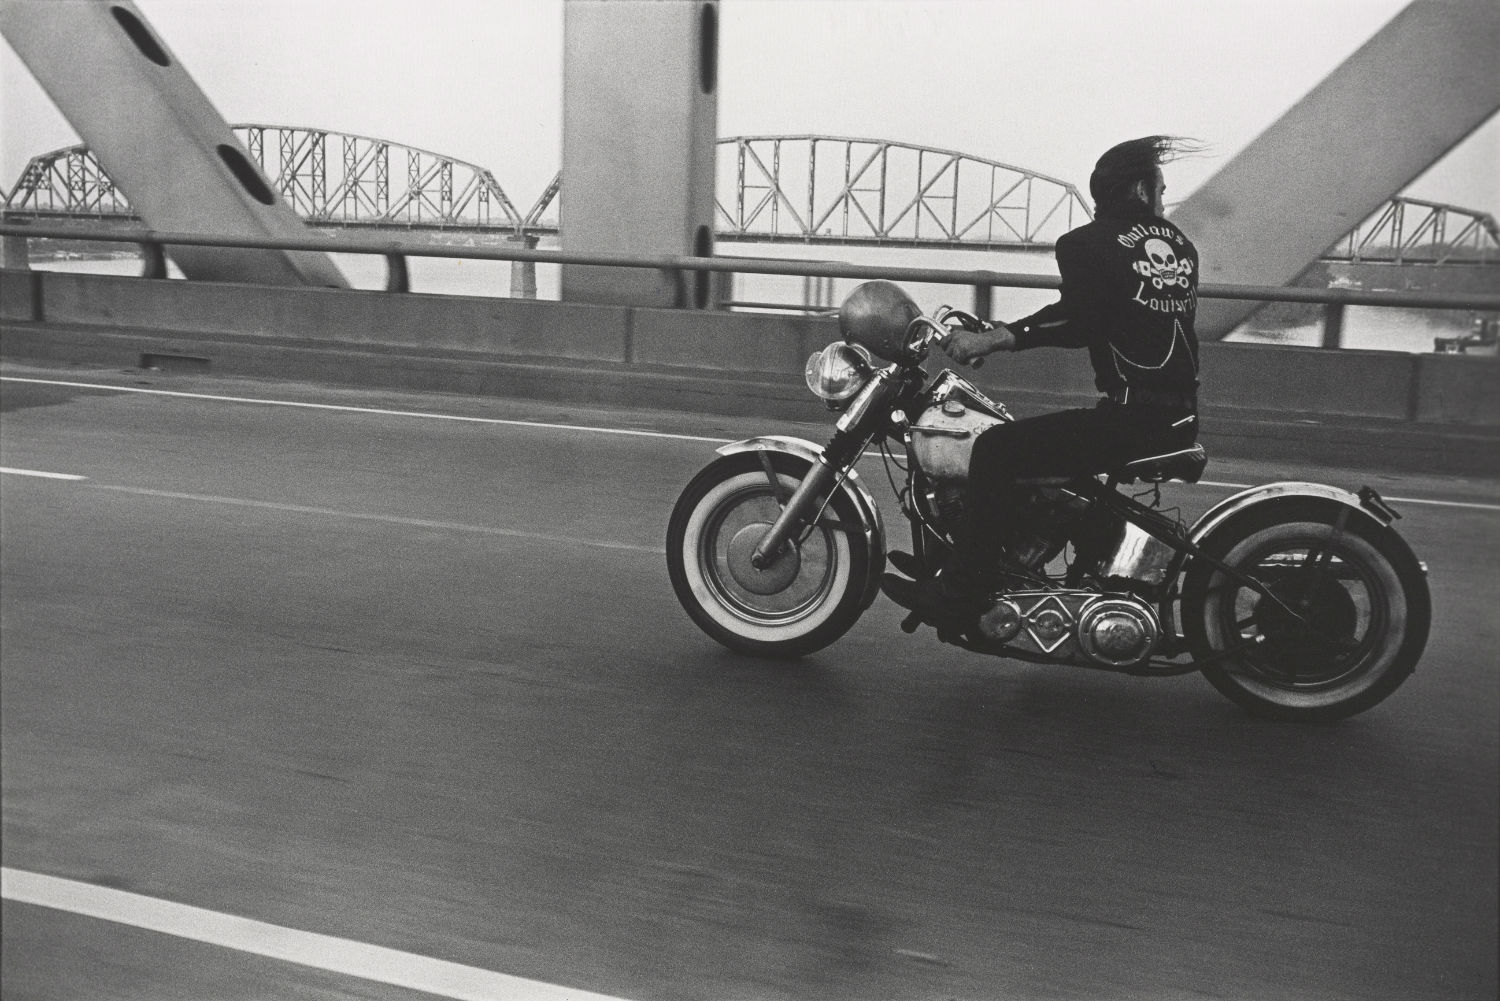 Crossing the Ohio River. Louisville, Ky. 1966.